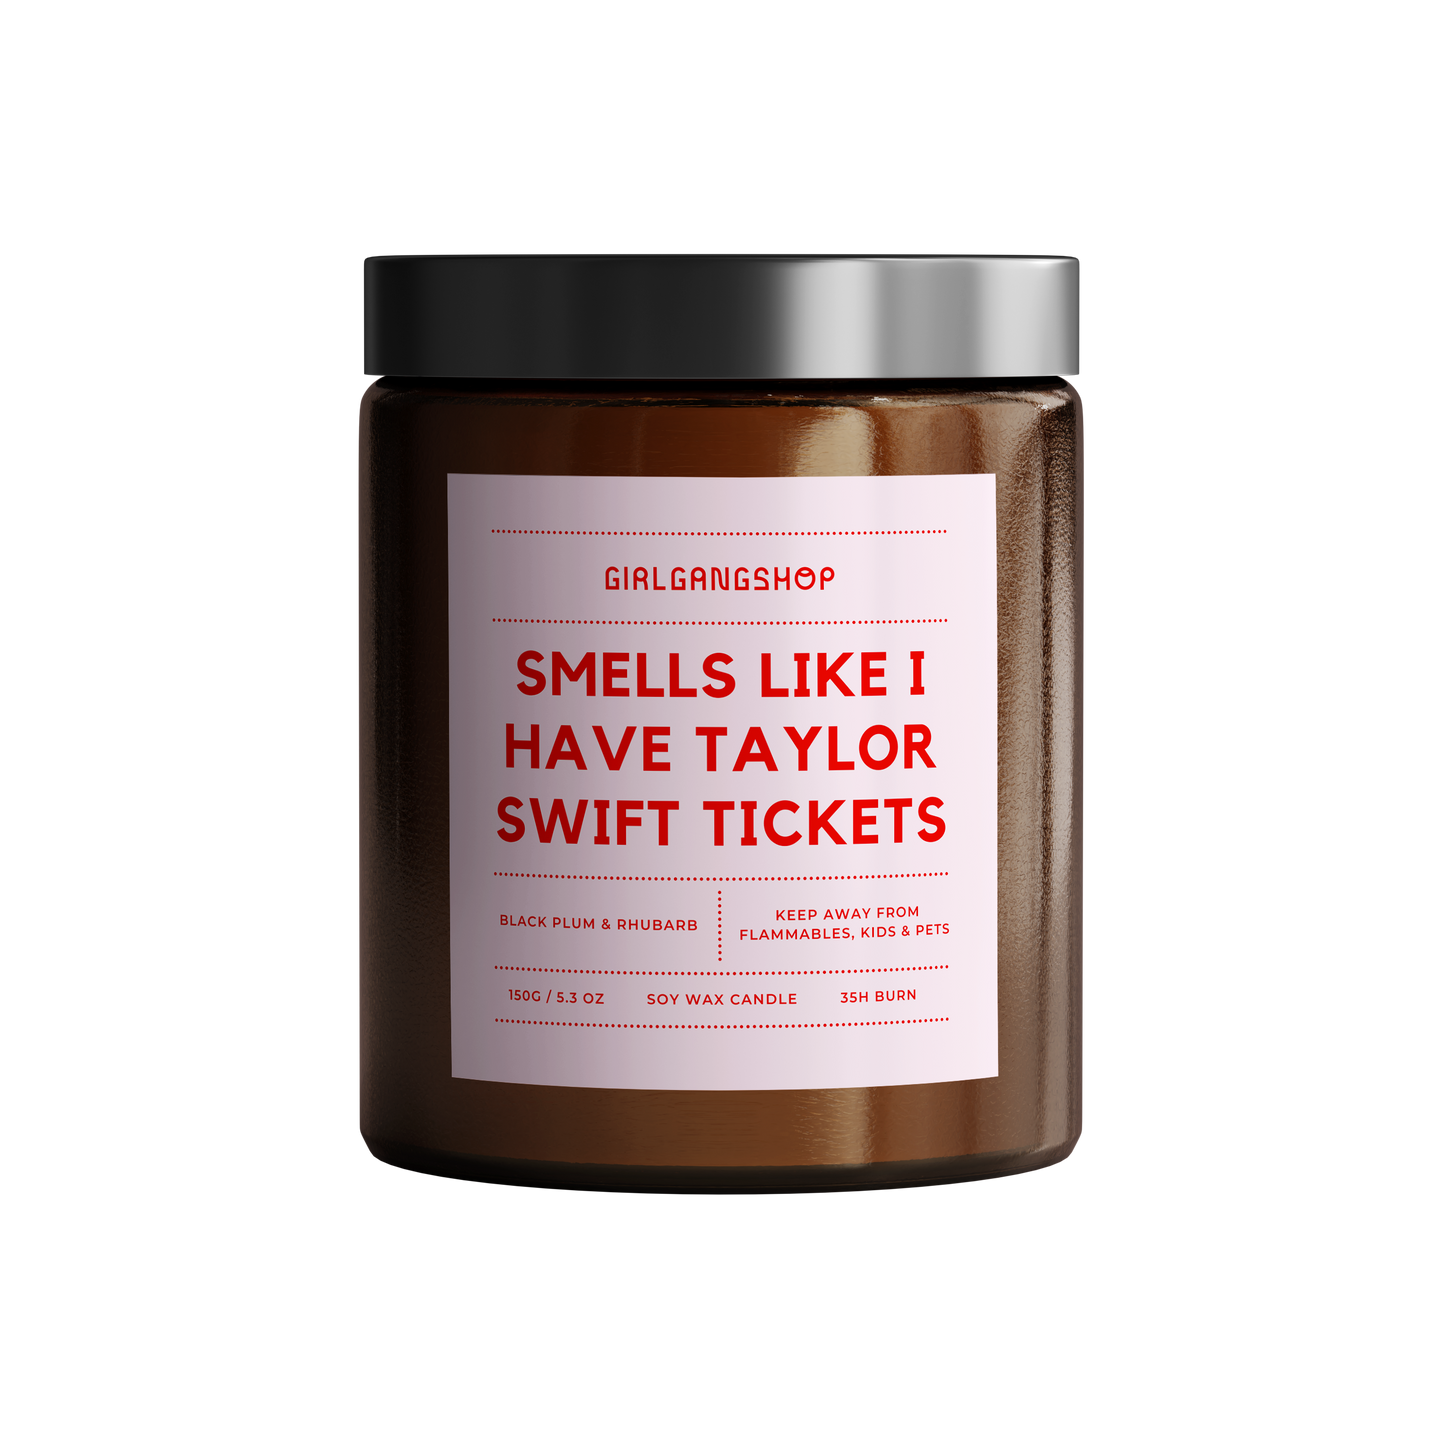 Smells Like Taylor Swift Tickets Candle